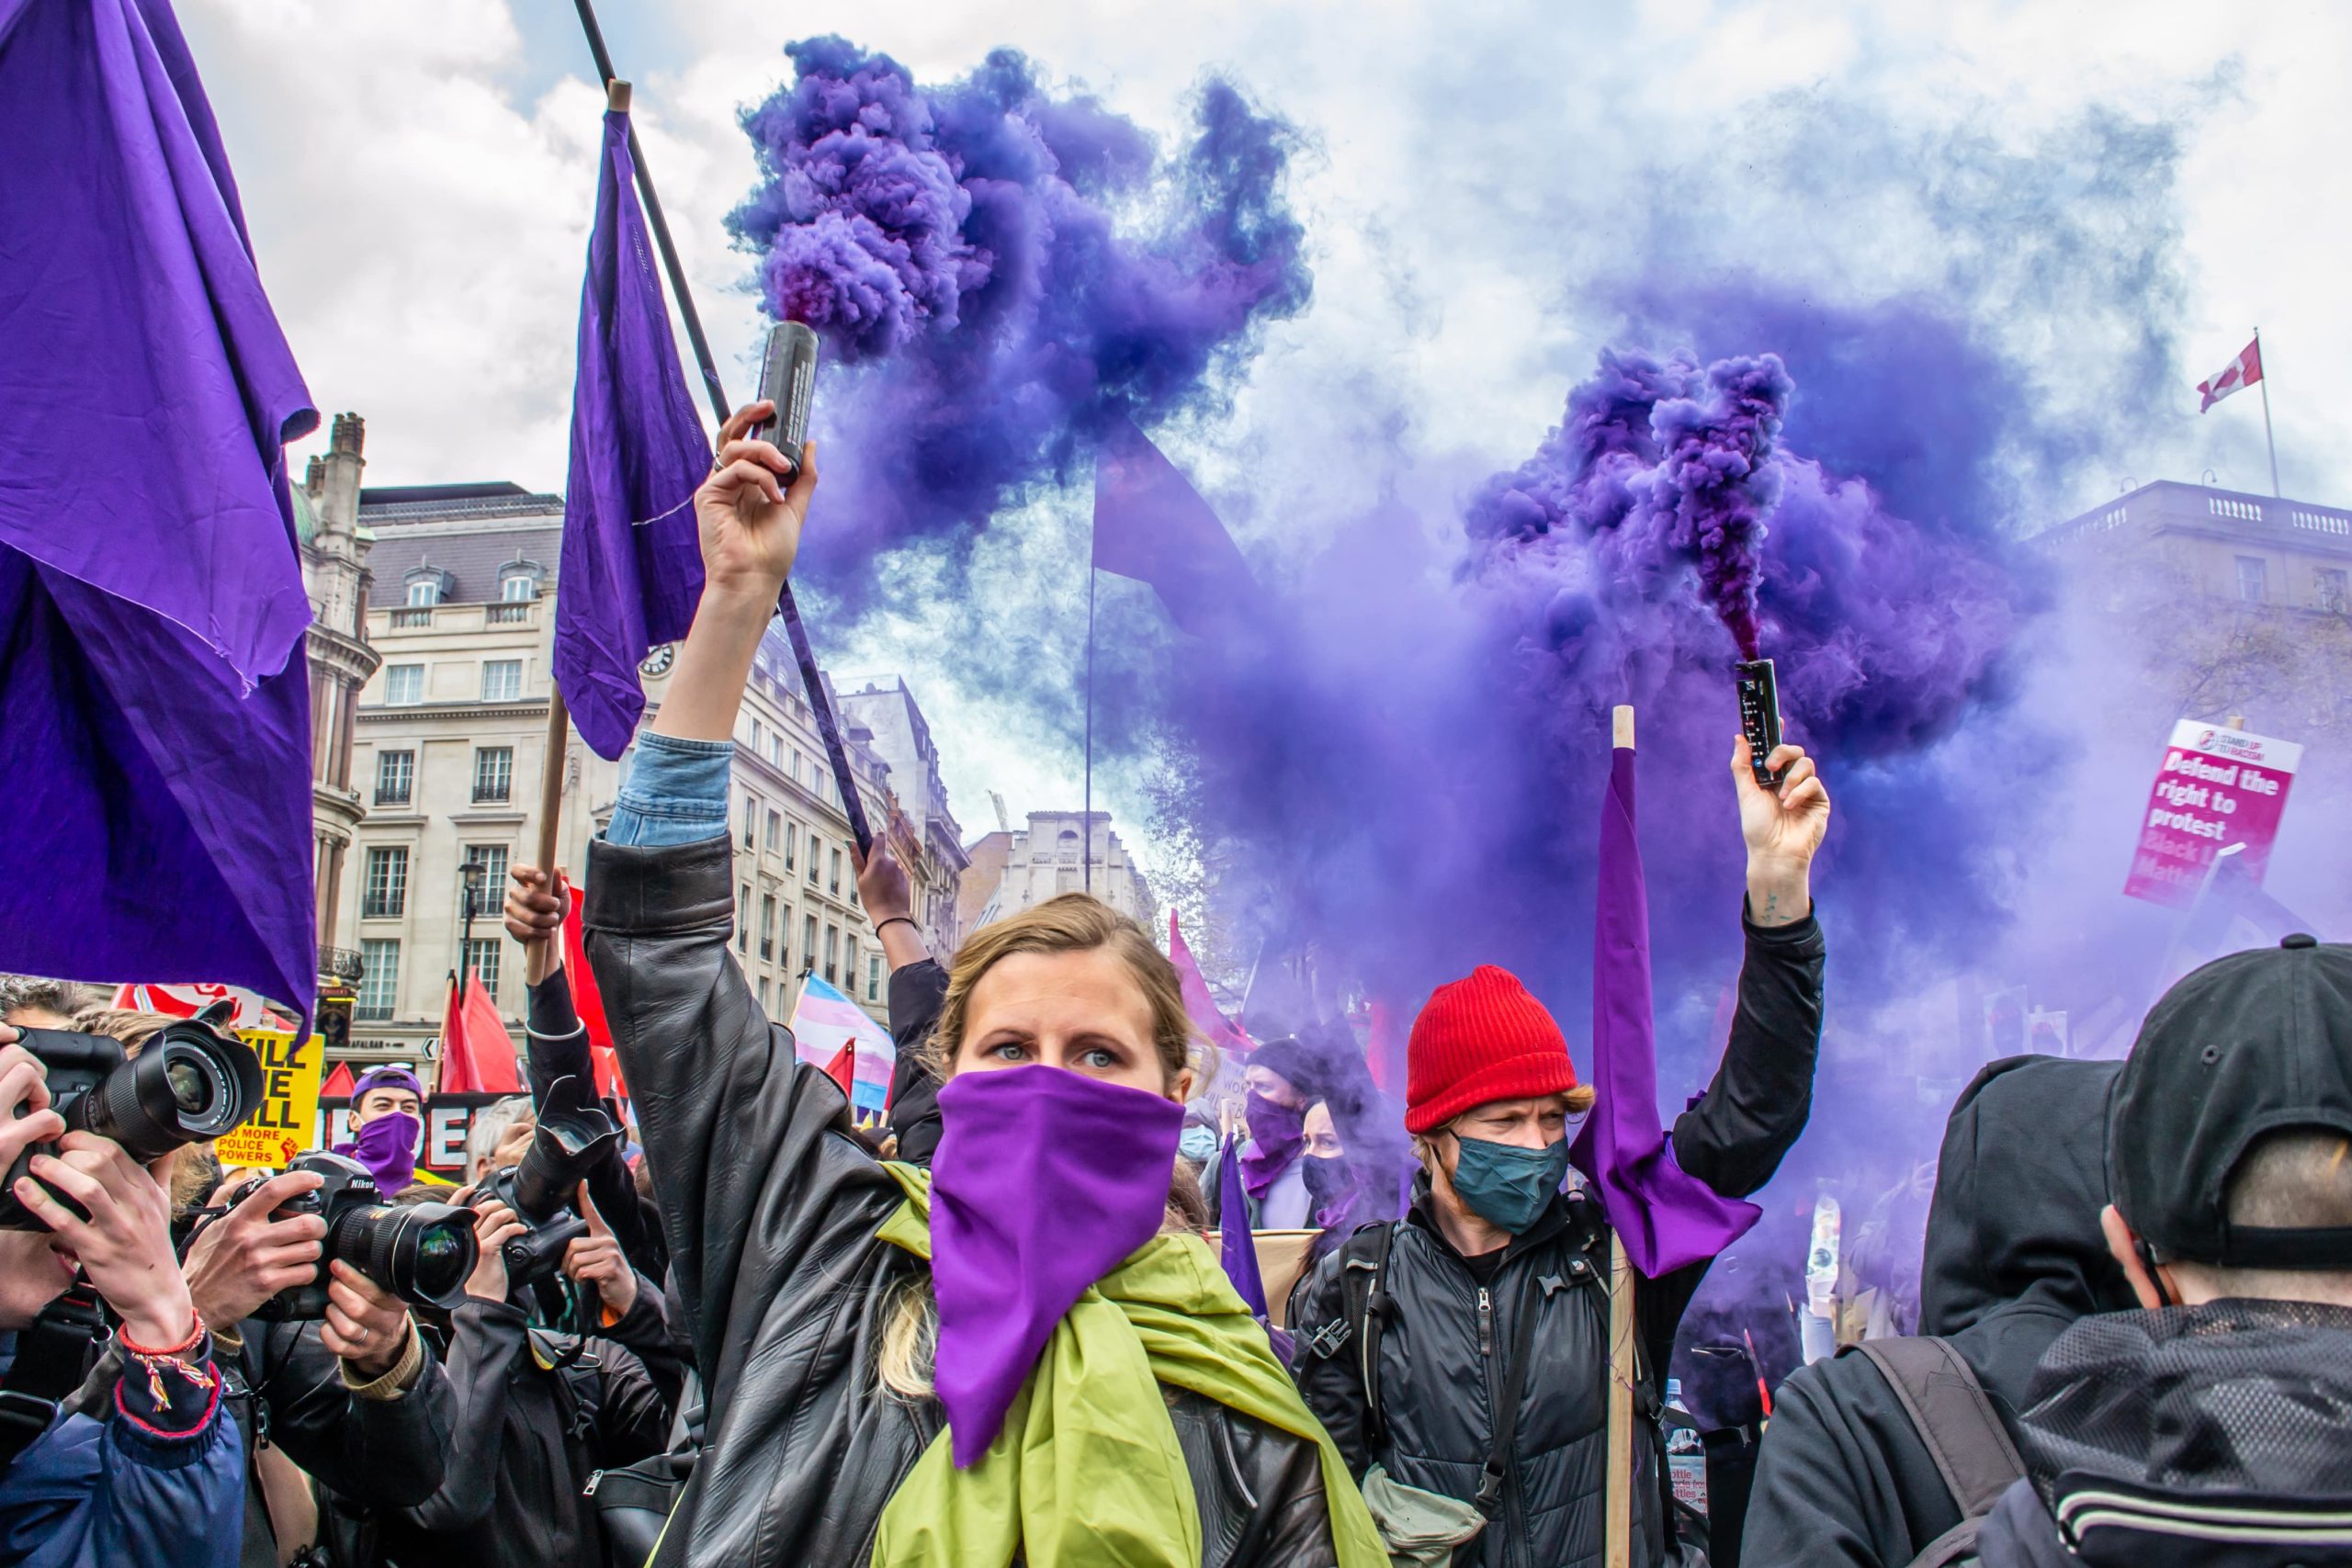 Source: Shutterstock, Jessica Girvan, Protesters at an anti-PCSC bill protest in London, May 1, 2021